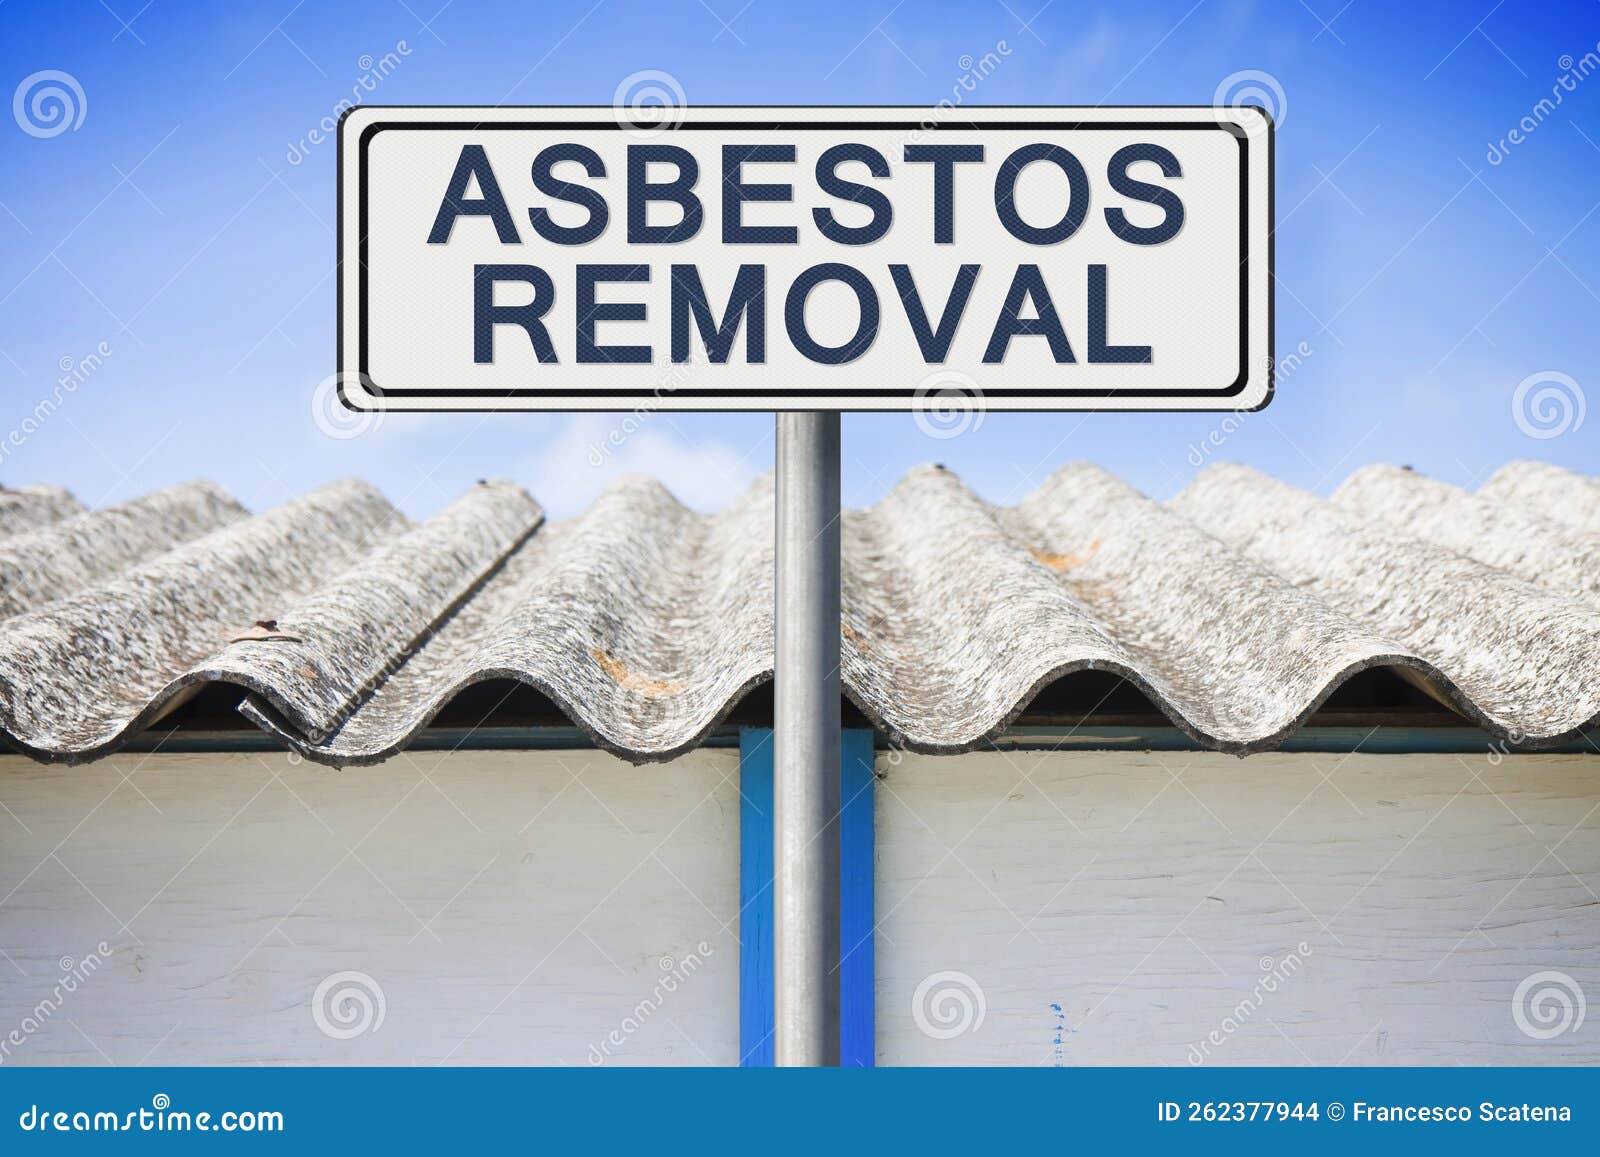 asbestos removal concept image with text written on a placard